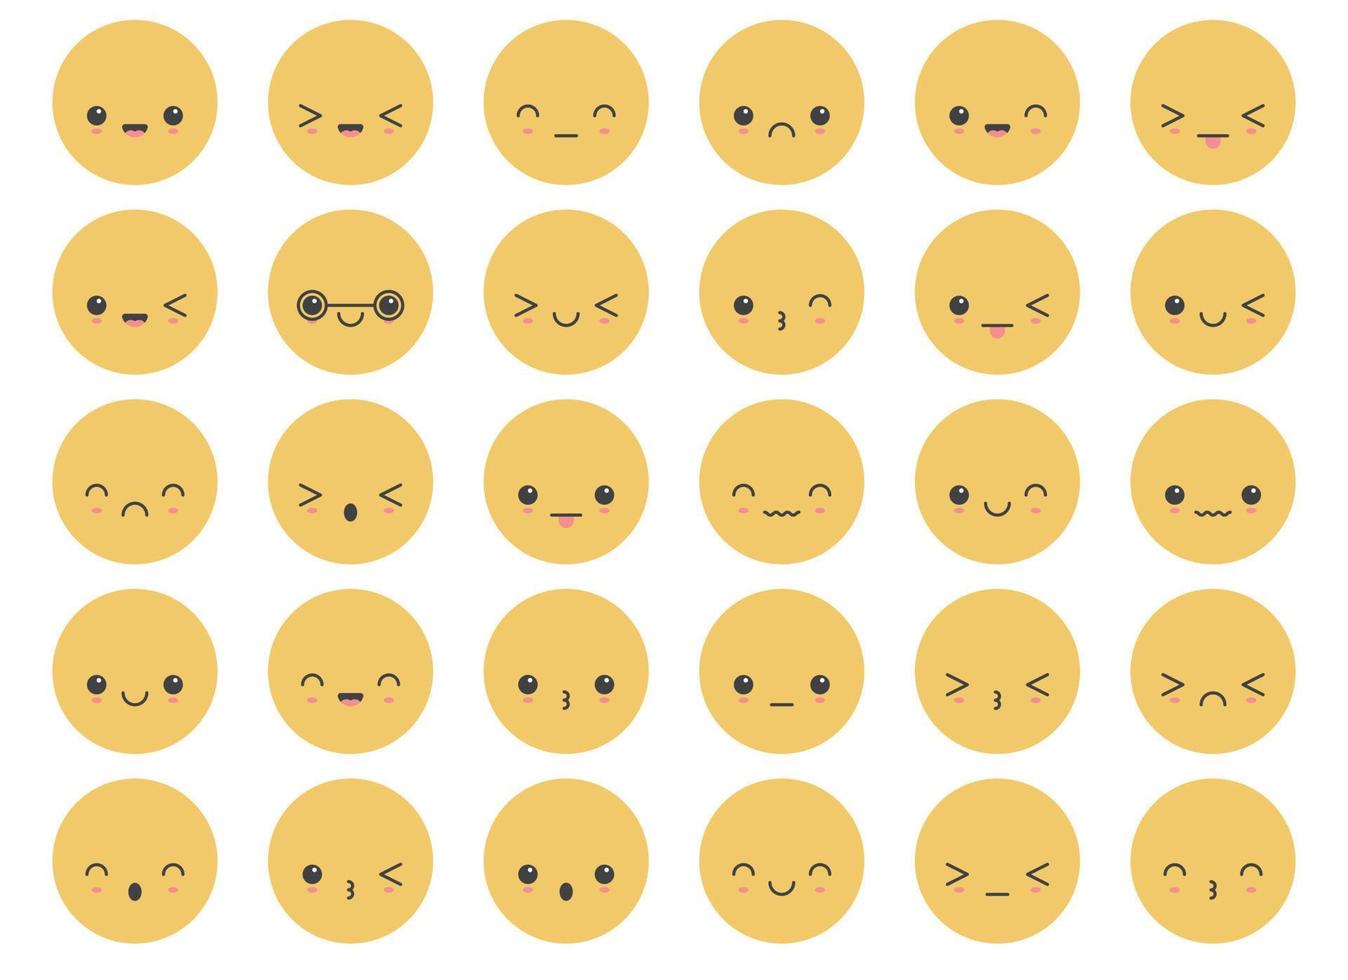 Cartoon emoji faces with different mood vector illustration collection